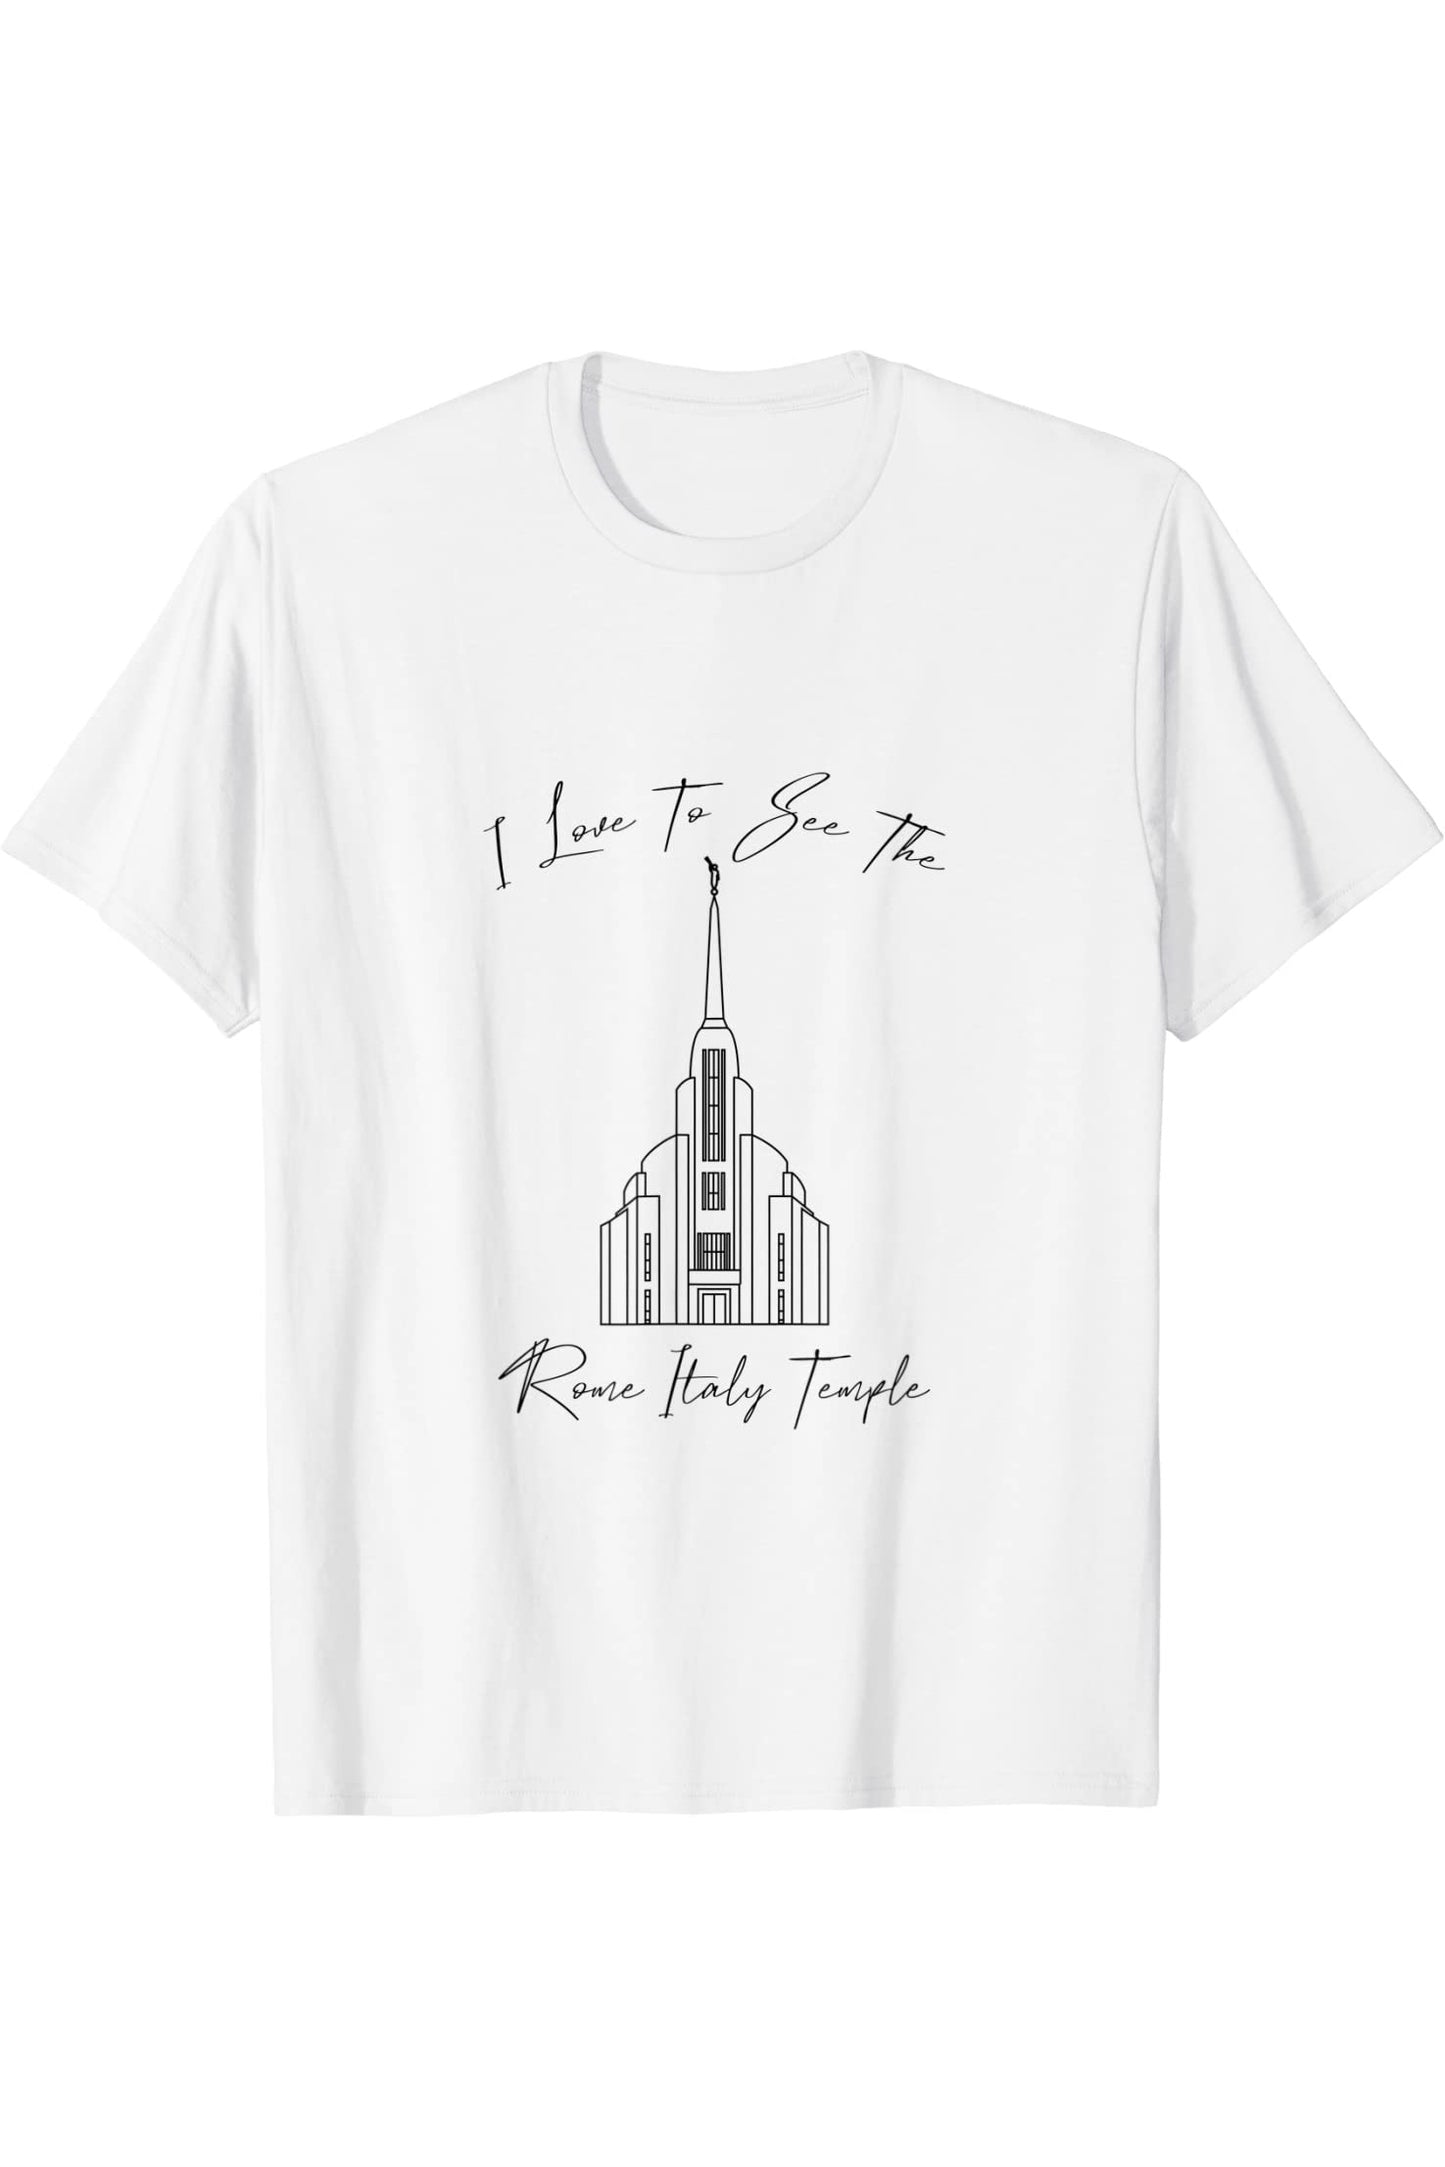 Rom Italy Temple, I love to see my Temple, Calligraphy T-Shirt